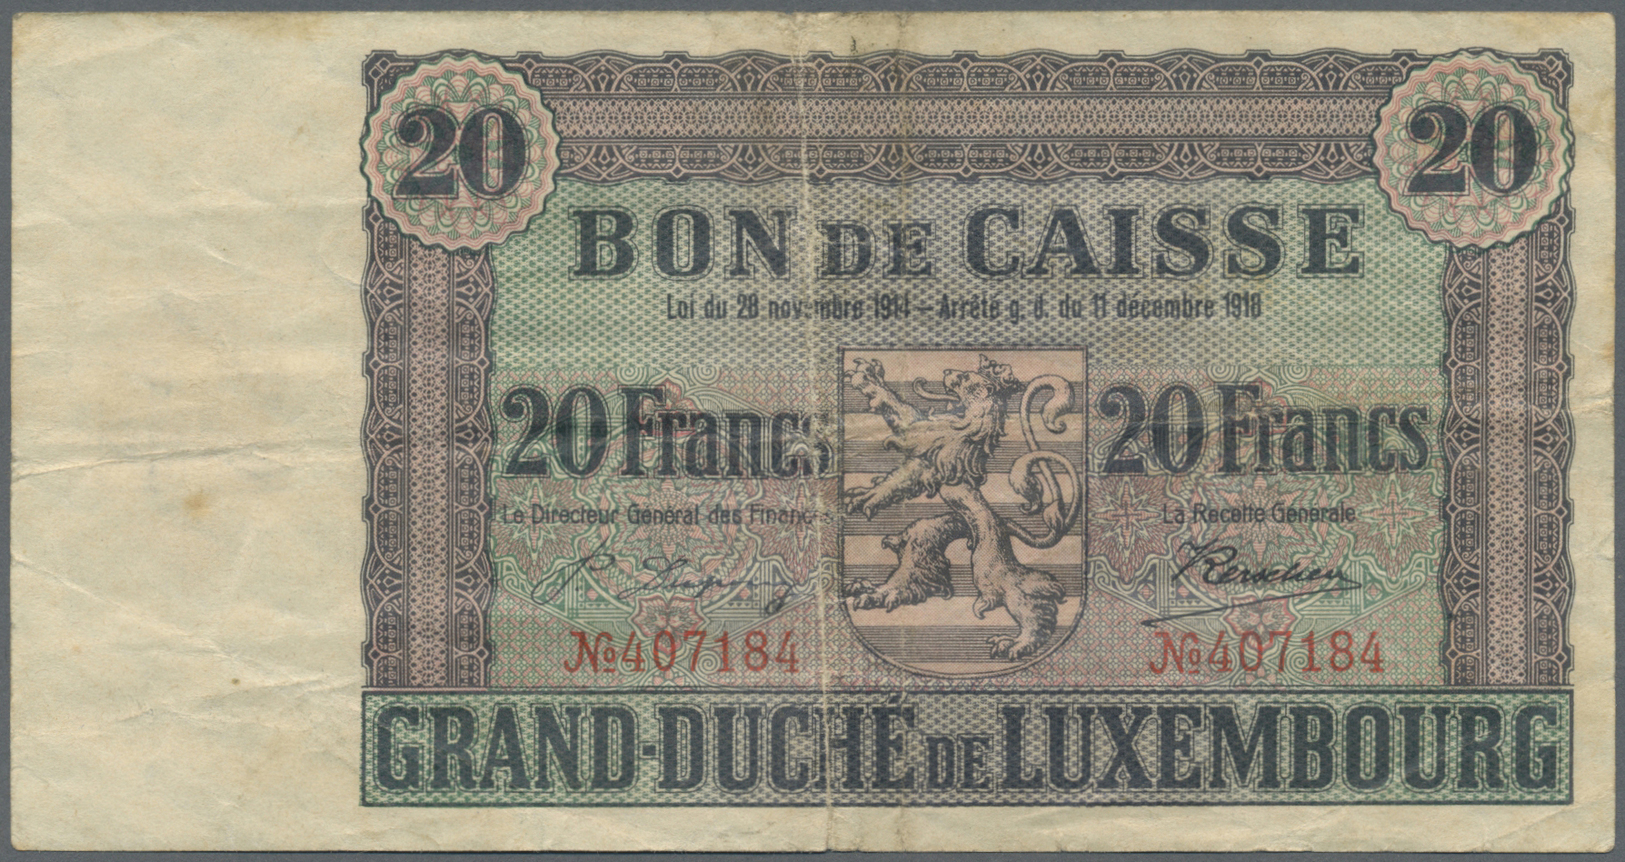 01588 Luxembourg: 20 Francs L.1918 P. 35, Rare Issue In Nice Condition For This Type, No Holes Or Tears, Just Vertical A - Luxembourg